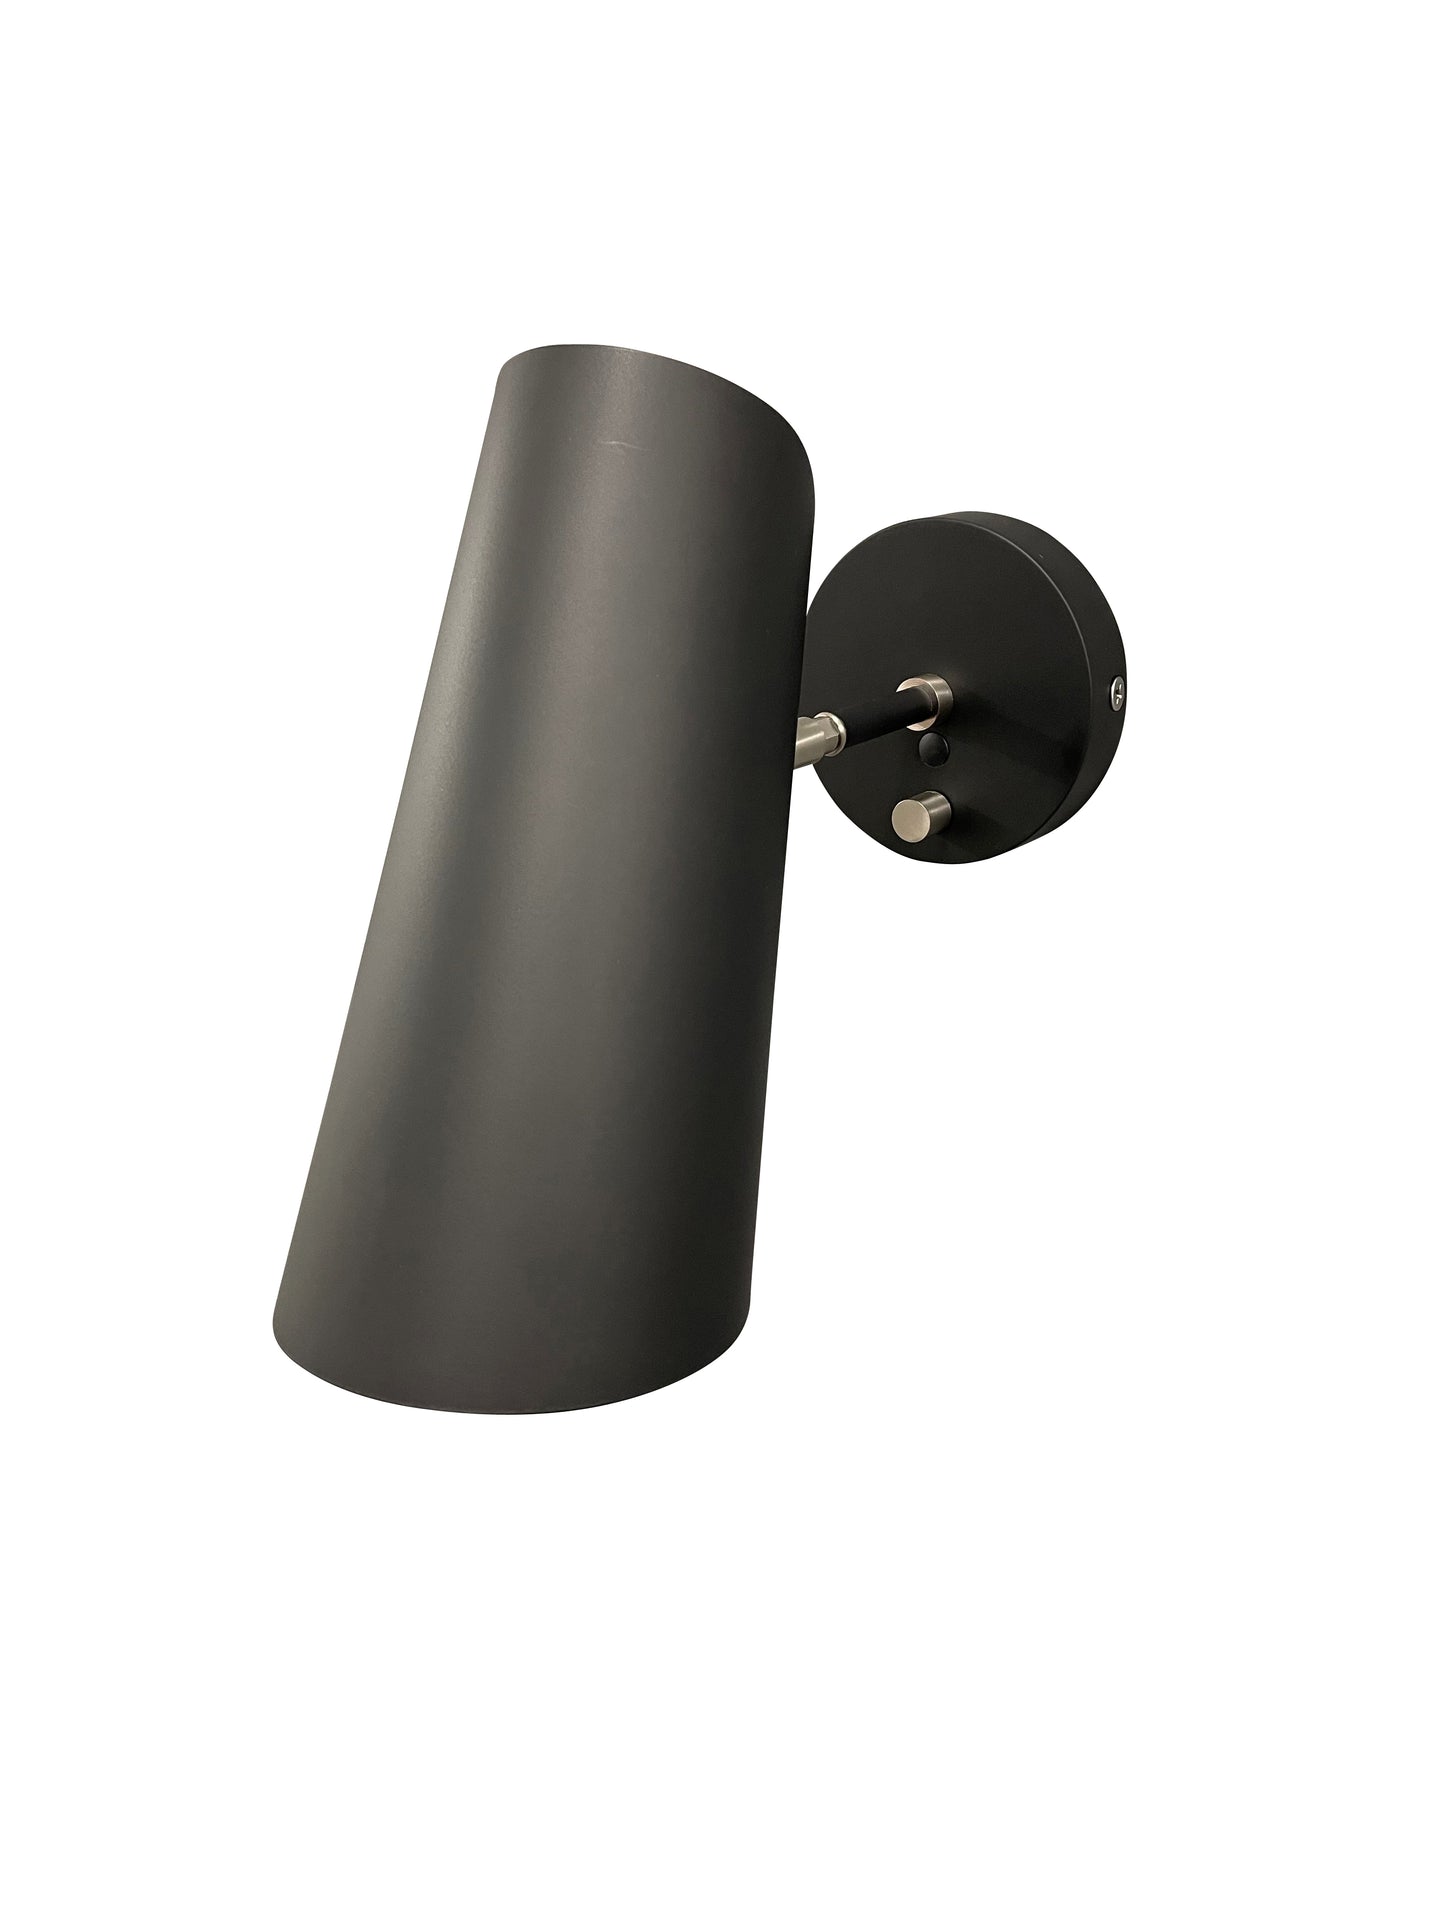 House of Troy Logan Black/Satin Nickel Wall Sconce with rolled shade L325-BLKSN